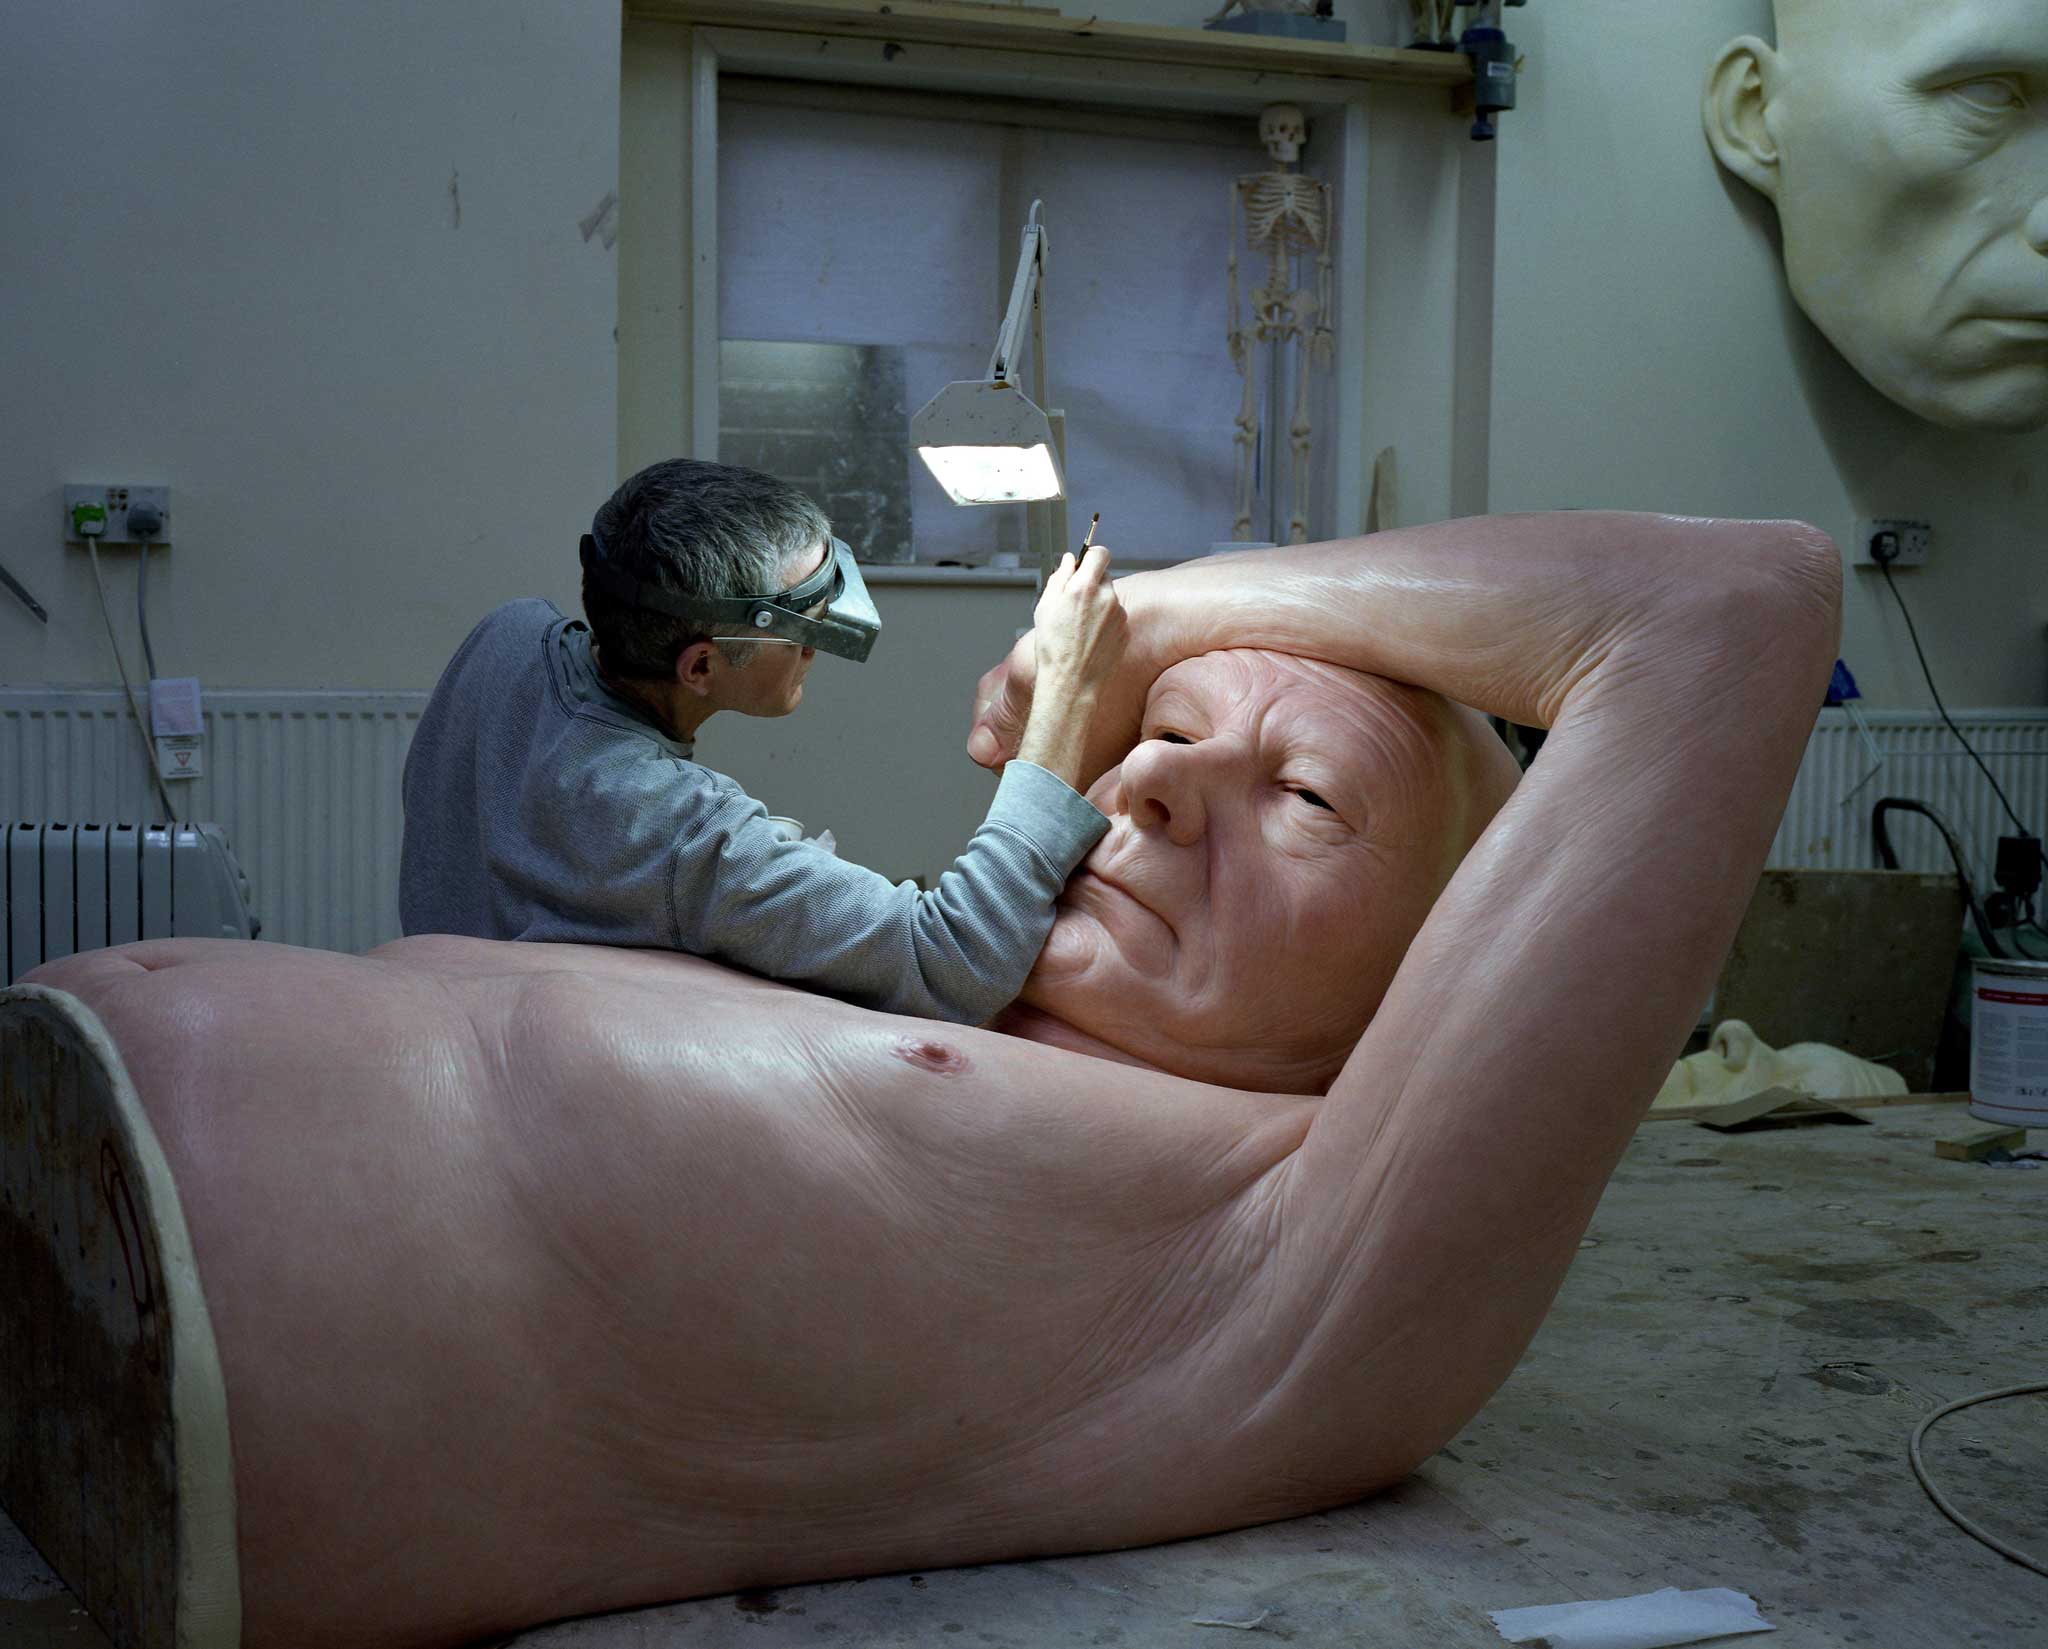 Patron-of-the-Arts-A-Figure-Essential-to-Every-Page-of-Arts-History-Ron-Mueck